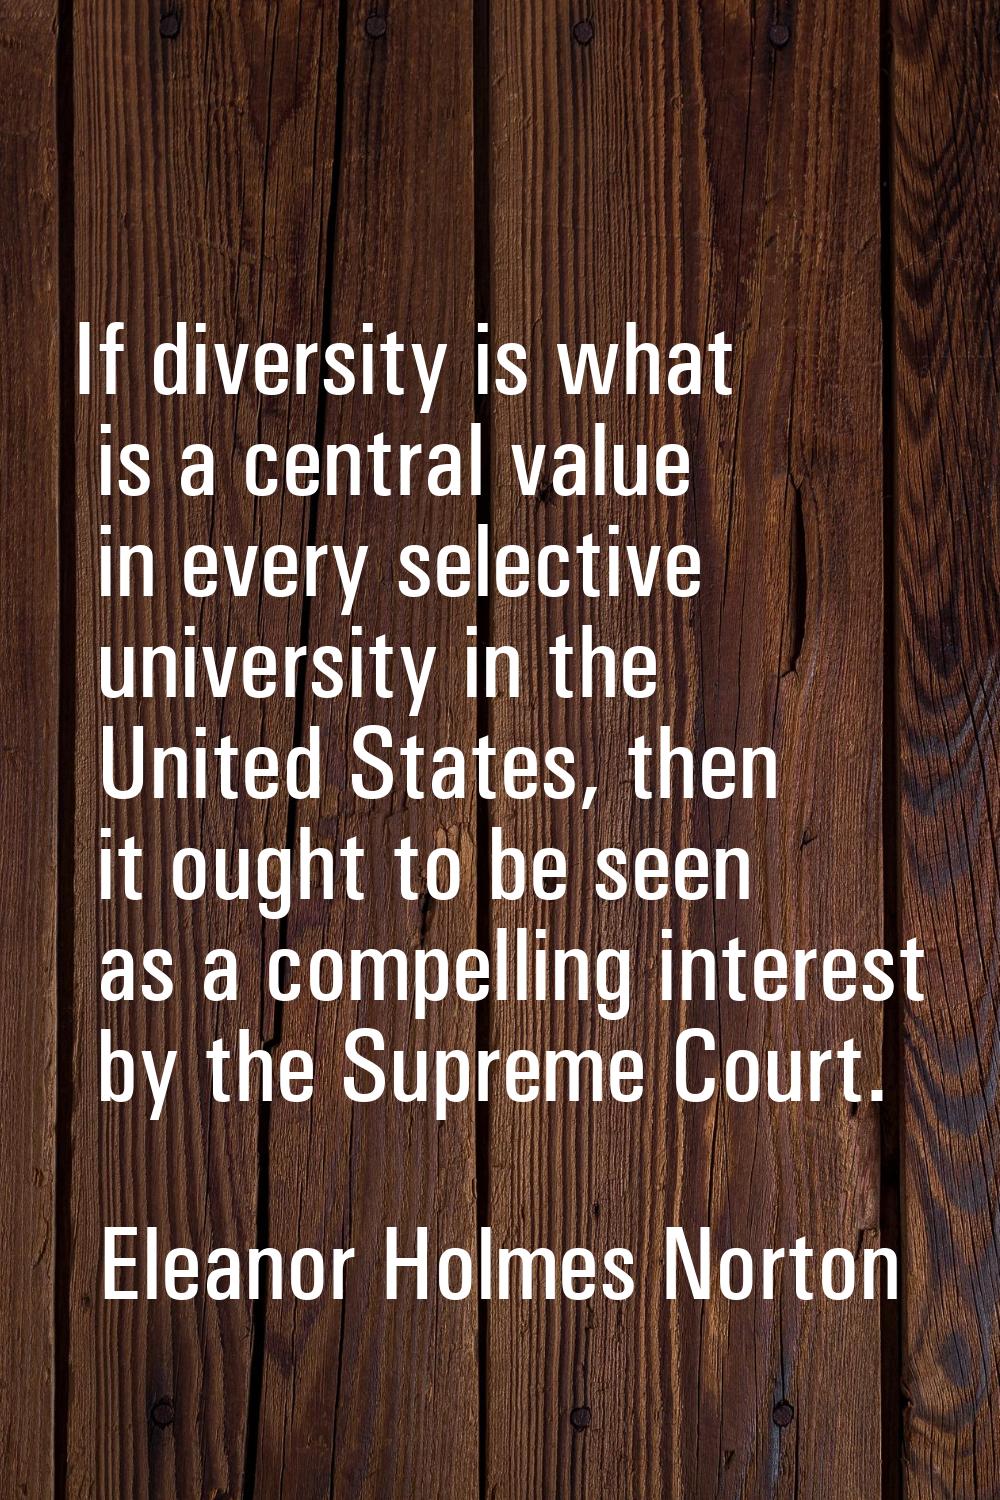 If diversity is what is a central value in every selective university in the United States, then it